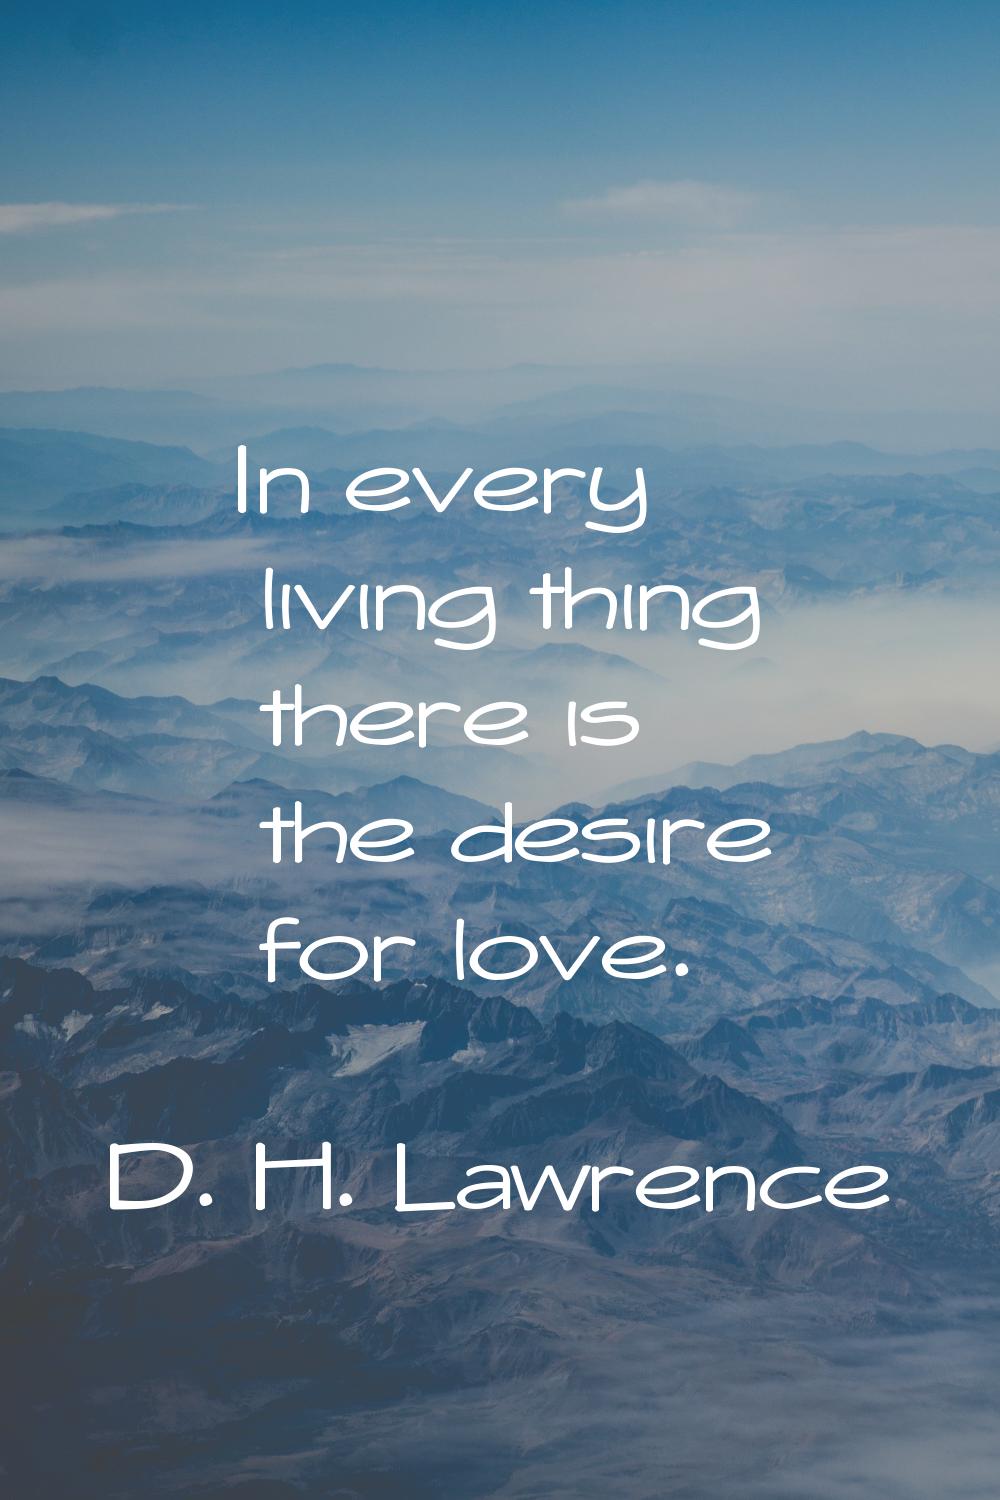 In every living thing there is the desire for love.